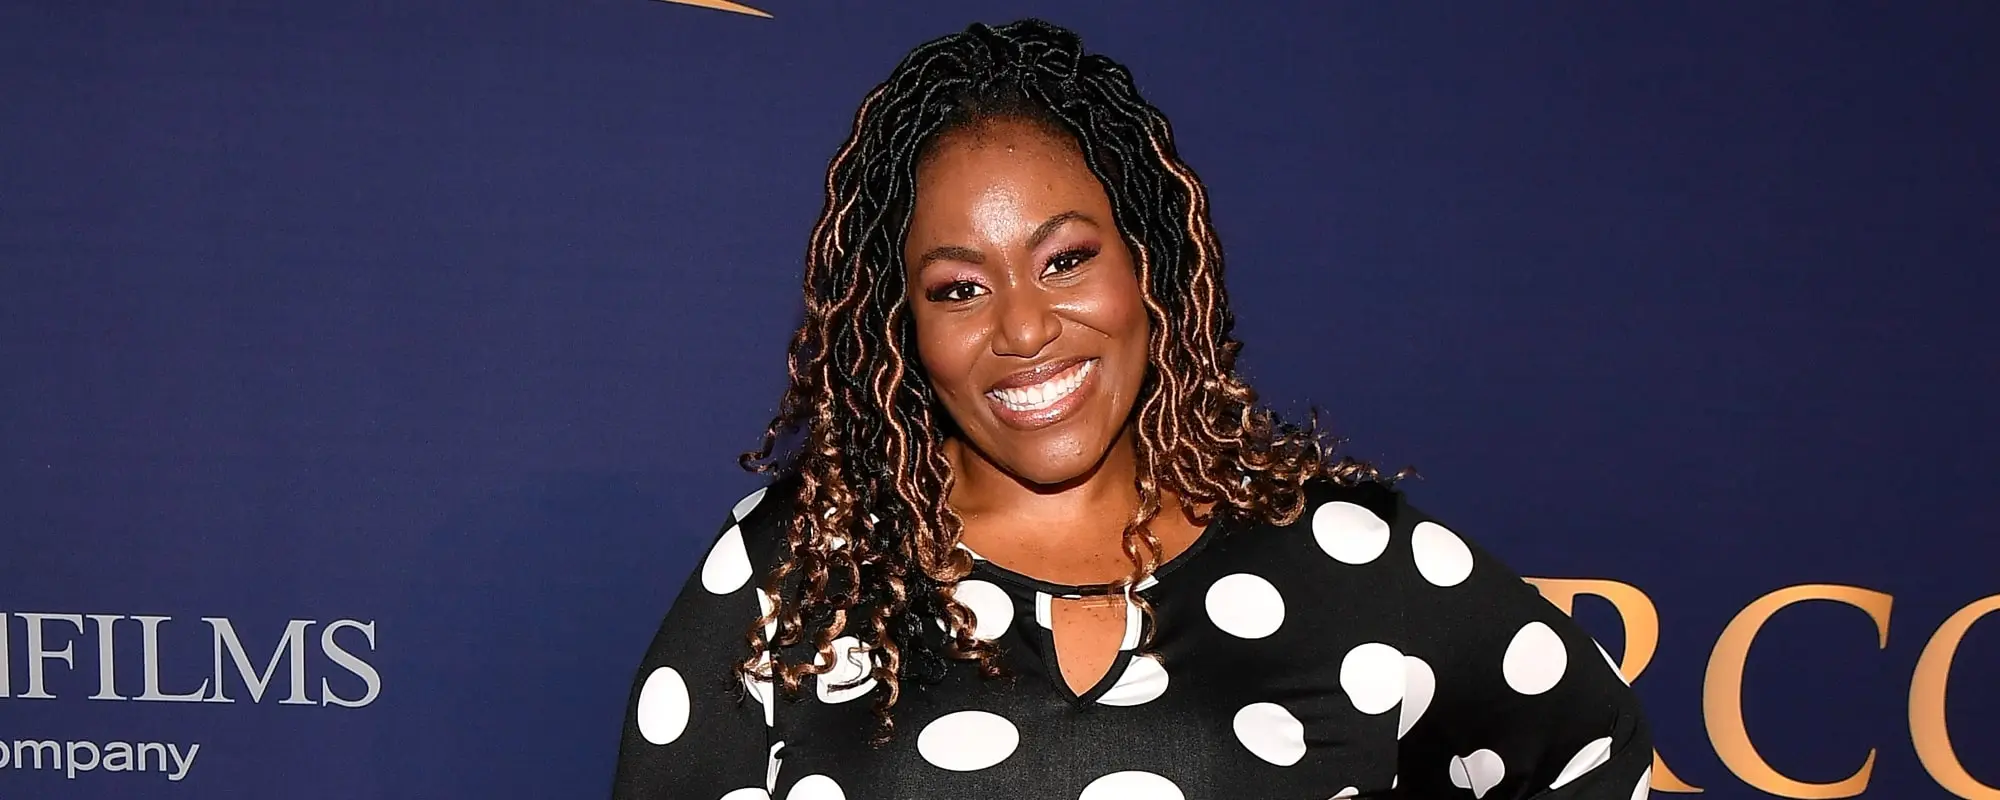 American Idol alum Mandisa attends the premiere of "Overcomer" at The Woodruff Arts Center & Symphony Hall on August 15, 2019 in Atlanta, Georgia.